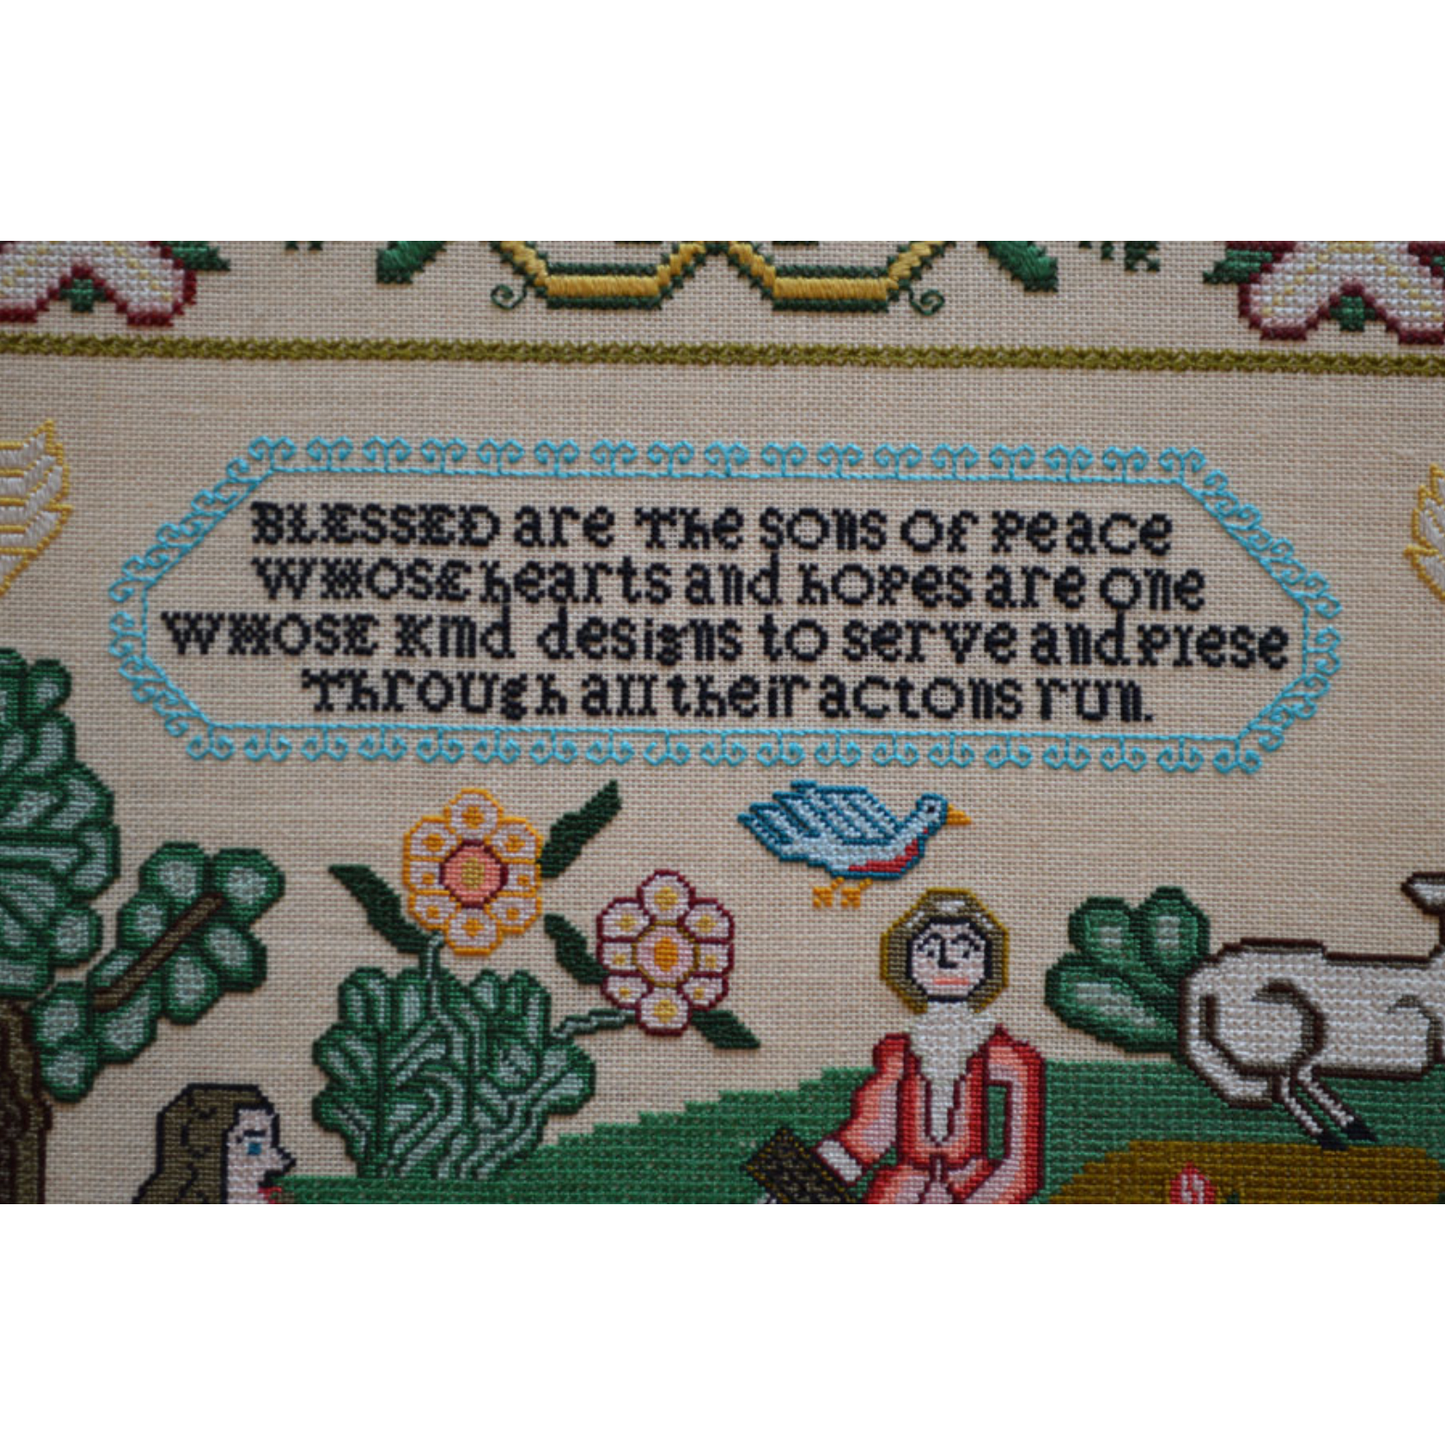 The Scarlet Letter ~ Blessed are the Sons of Peace Reproduction Sampler Pattern